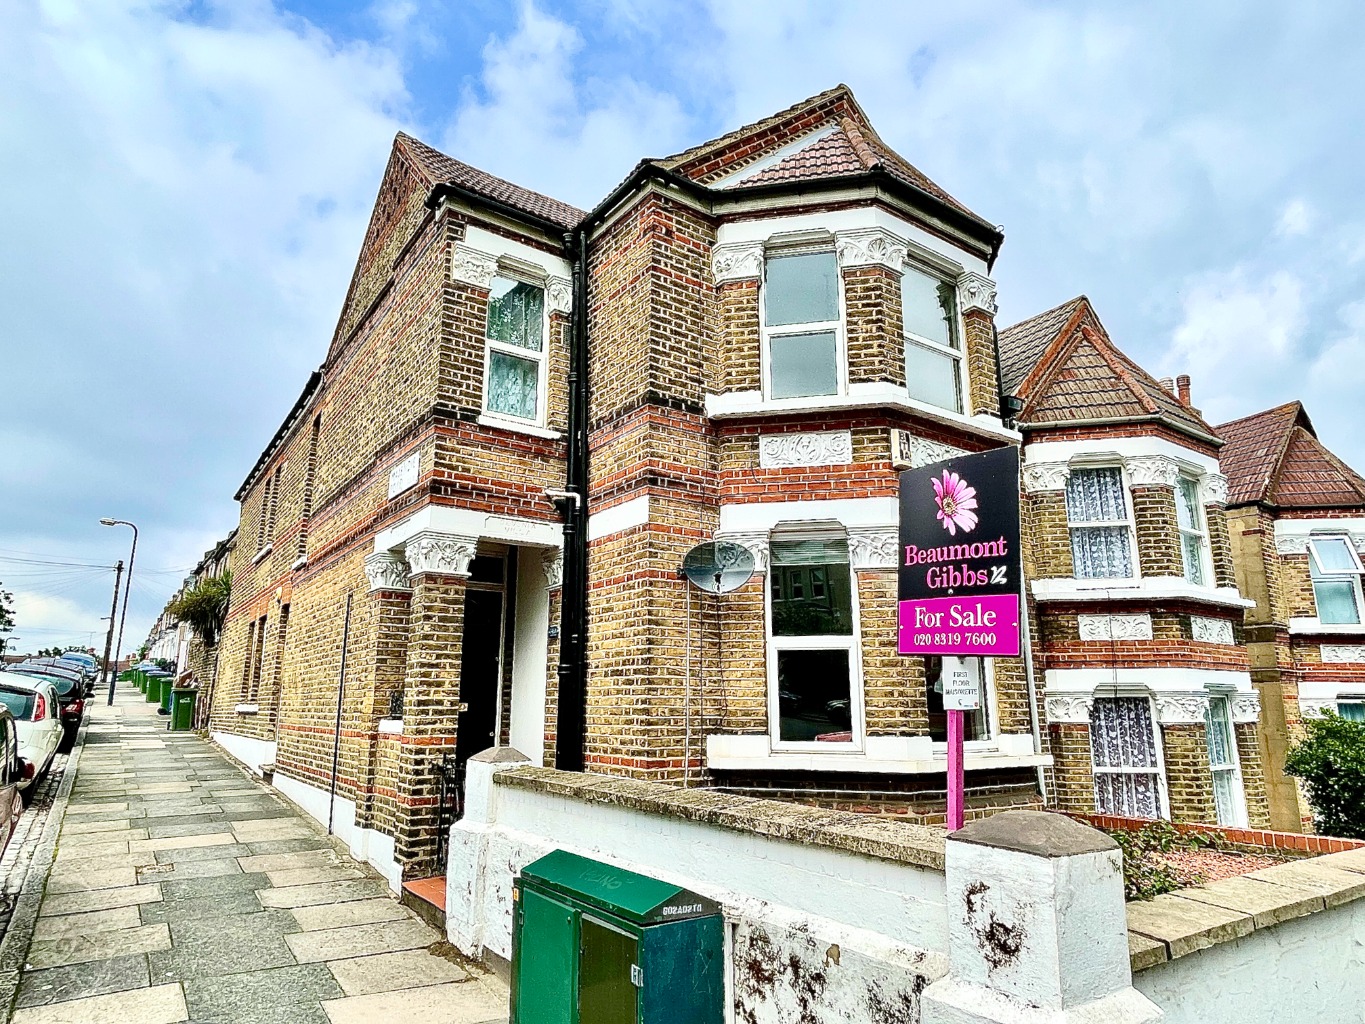 * TWO BEDROOMED FIRST FLOOR MAISONETTE * OWN PRIVATE ENTRANCE DOOR * OWN FRONT GARDEN SPACE * UNEXPIRED 999 YEAR LEASE * SHARE OF FREEHOLD * OFFERED IN GOOD CONDITION THROUGHOUT * GAS CENTRAL HEATING * DOUBLE GLAZING * OFFERED WITH IMMEDIATE VACANT POSSESSION * SEE VIDEO WALKTHROUGH TOUR *